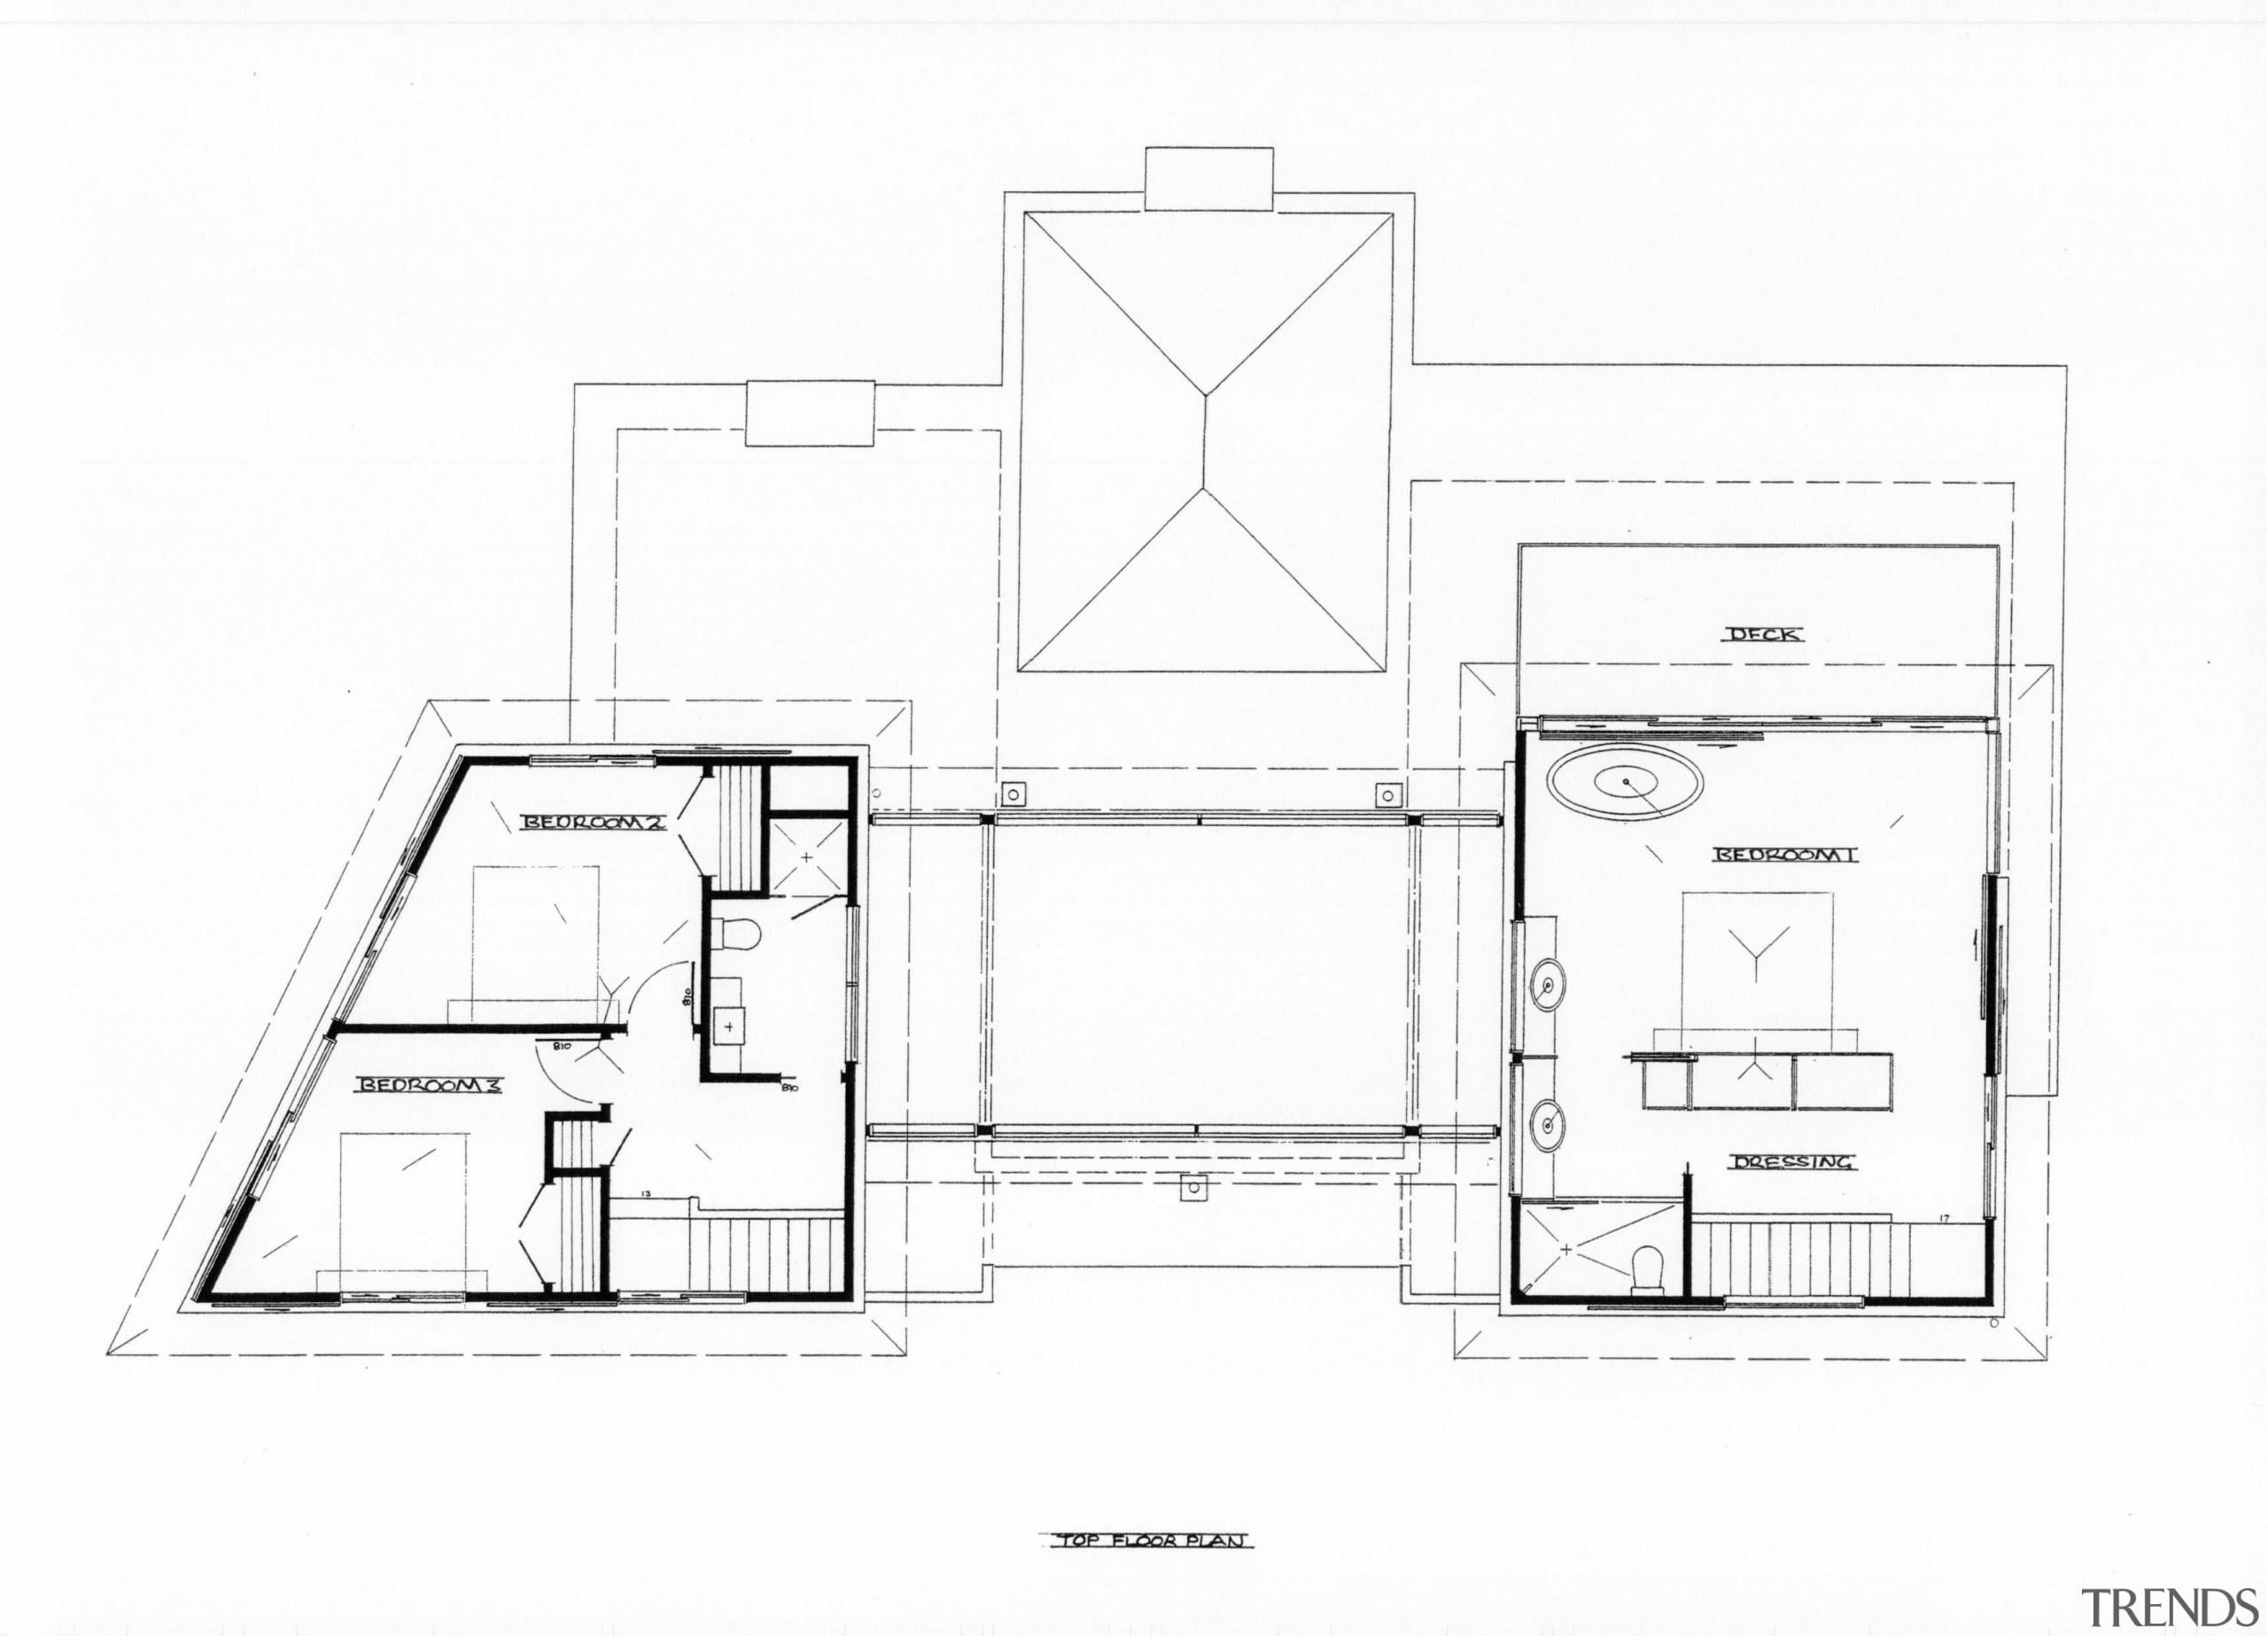 View of plans for bach. - View of angle, architecture, area, black and white, design, diagram, drawing, elevation, floor plan, line, pattern, plan, product, product design, schematic, square, structure, white